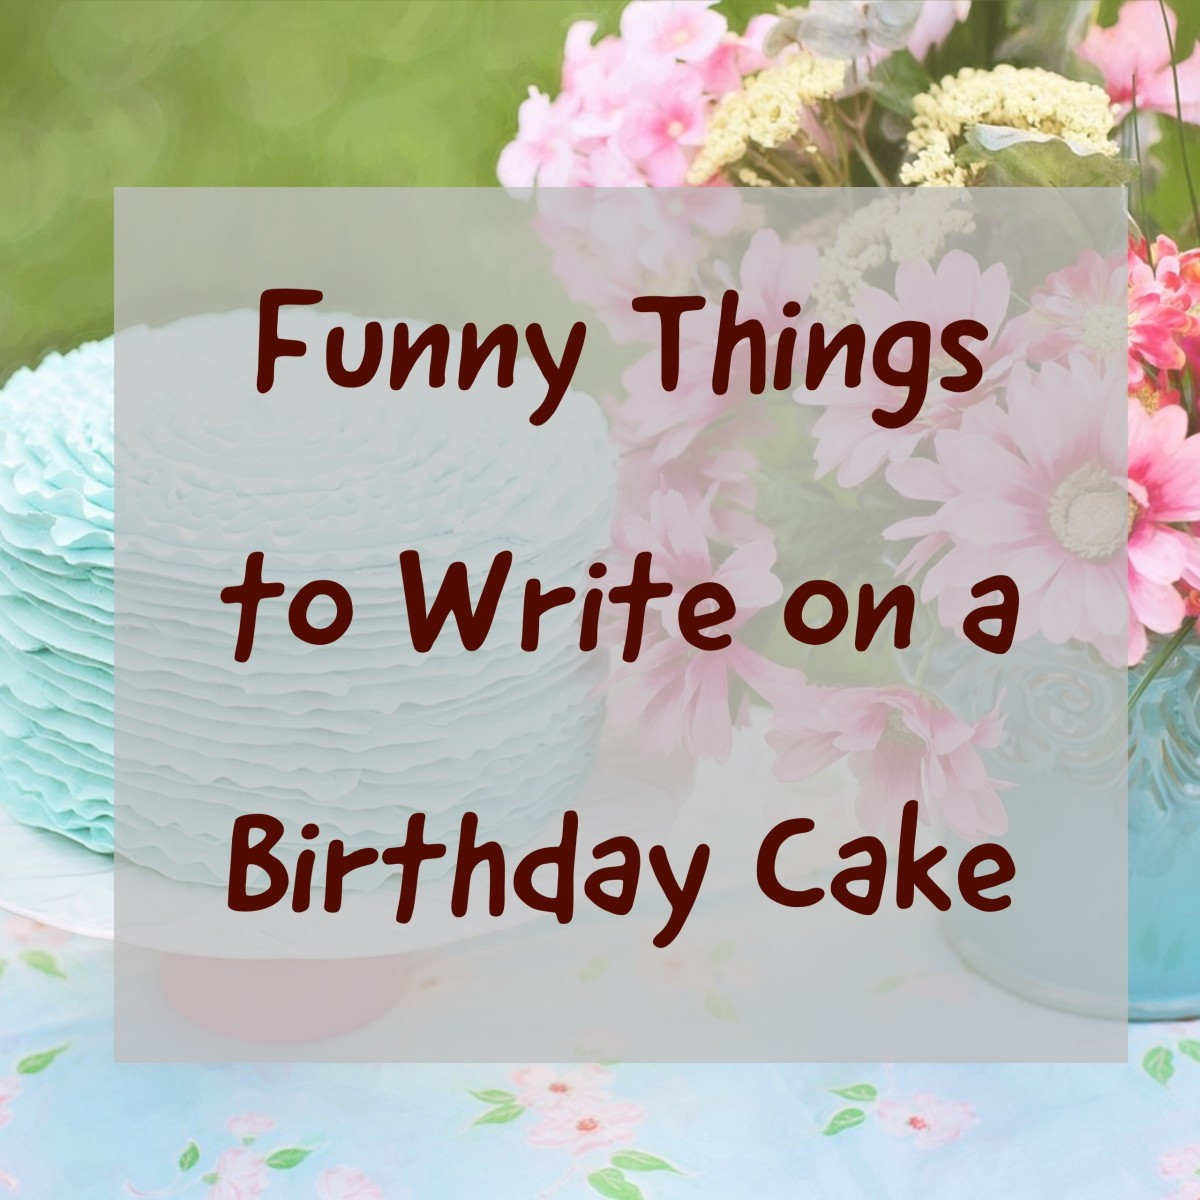 Birthday Cake Sayings
 Over 100 Funny Things to Write on a Birthday Cake